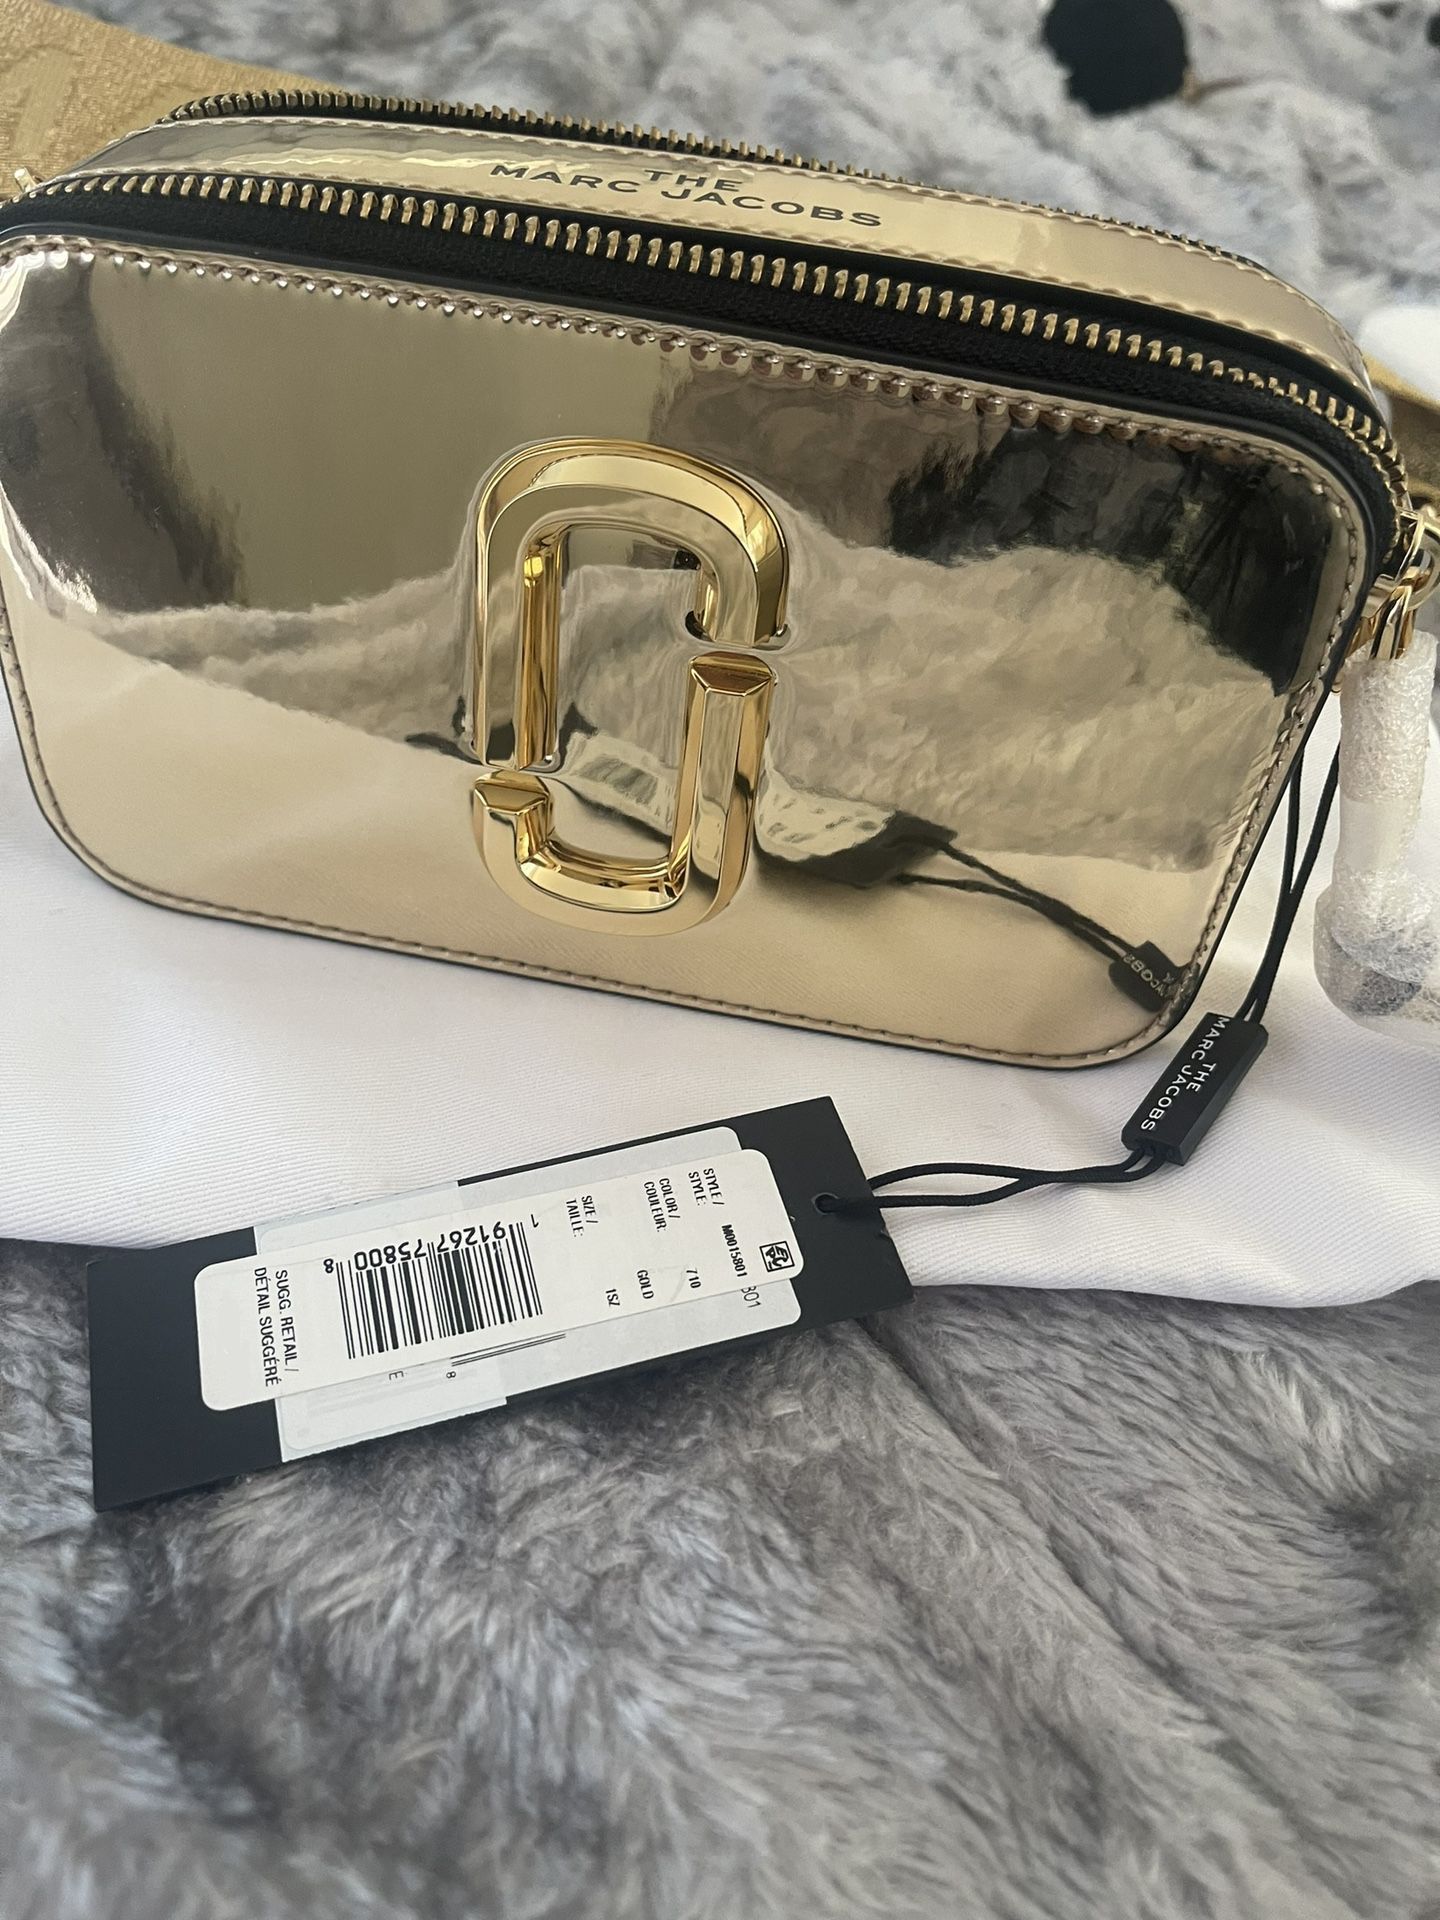 GOLD MARC JACOBS The Snapshot bag